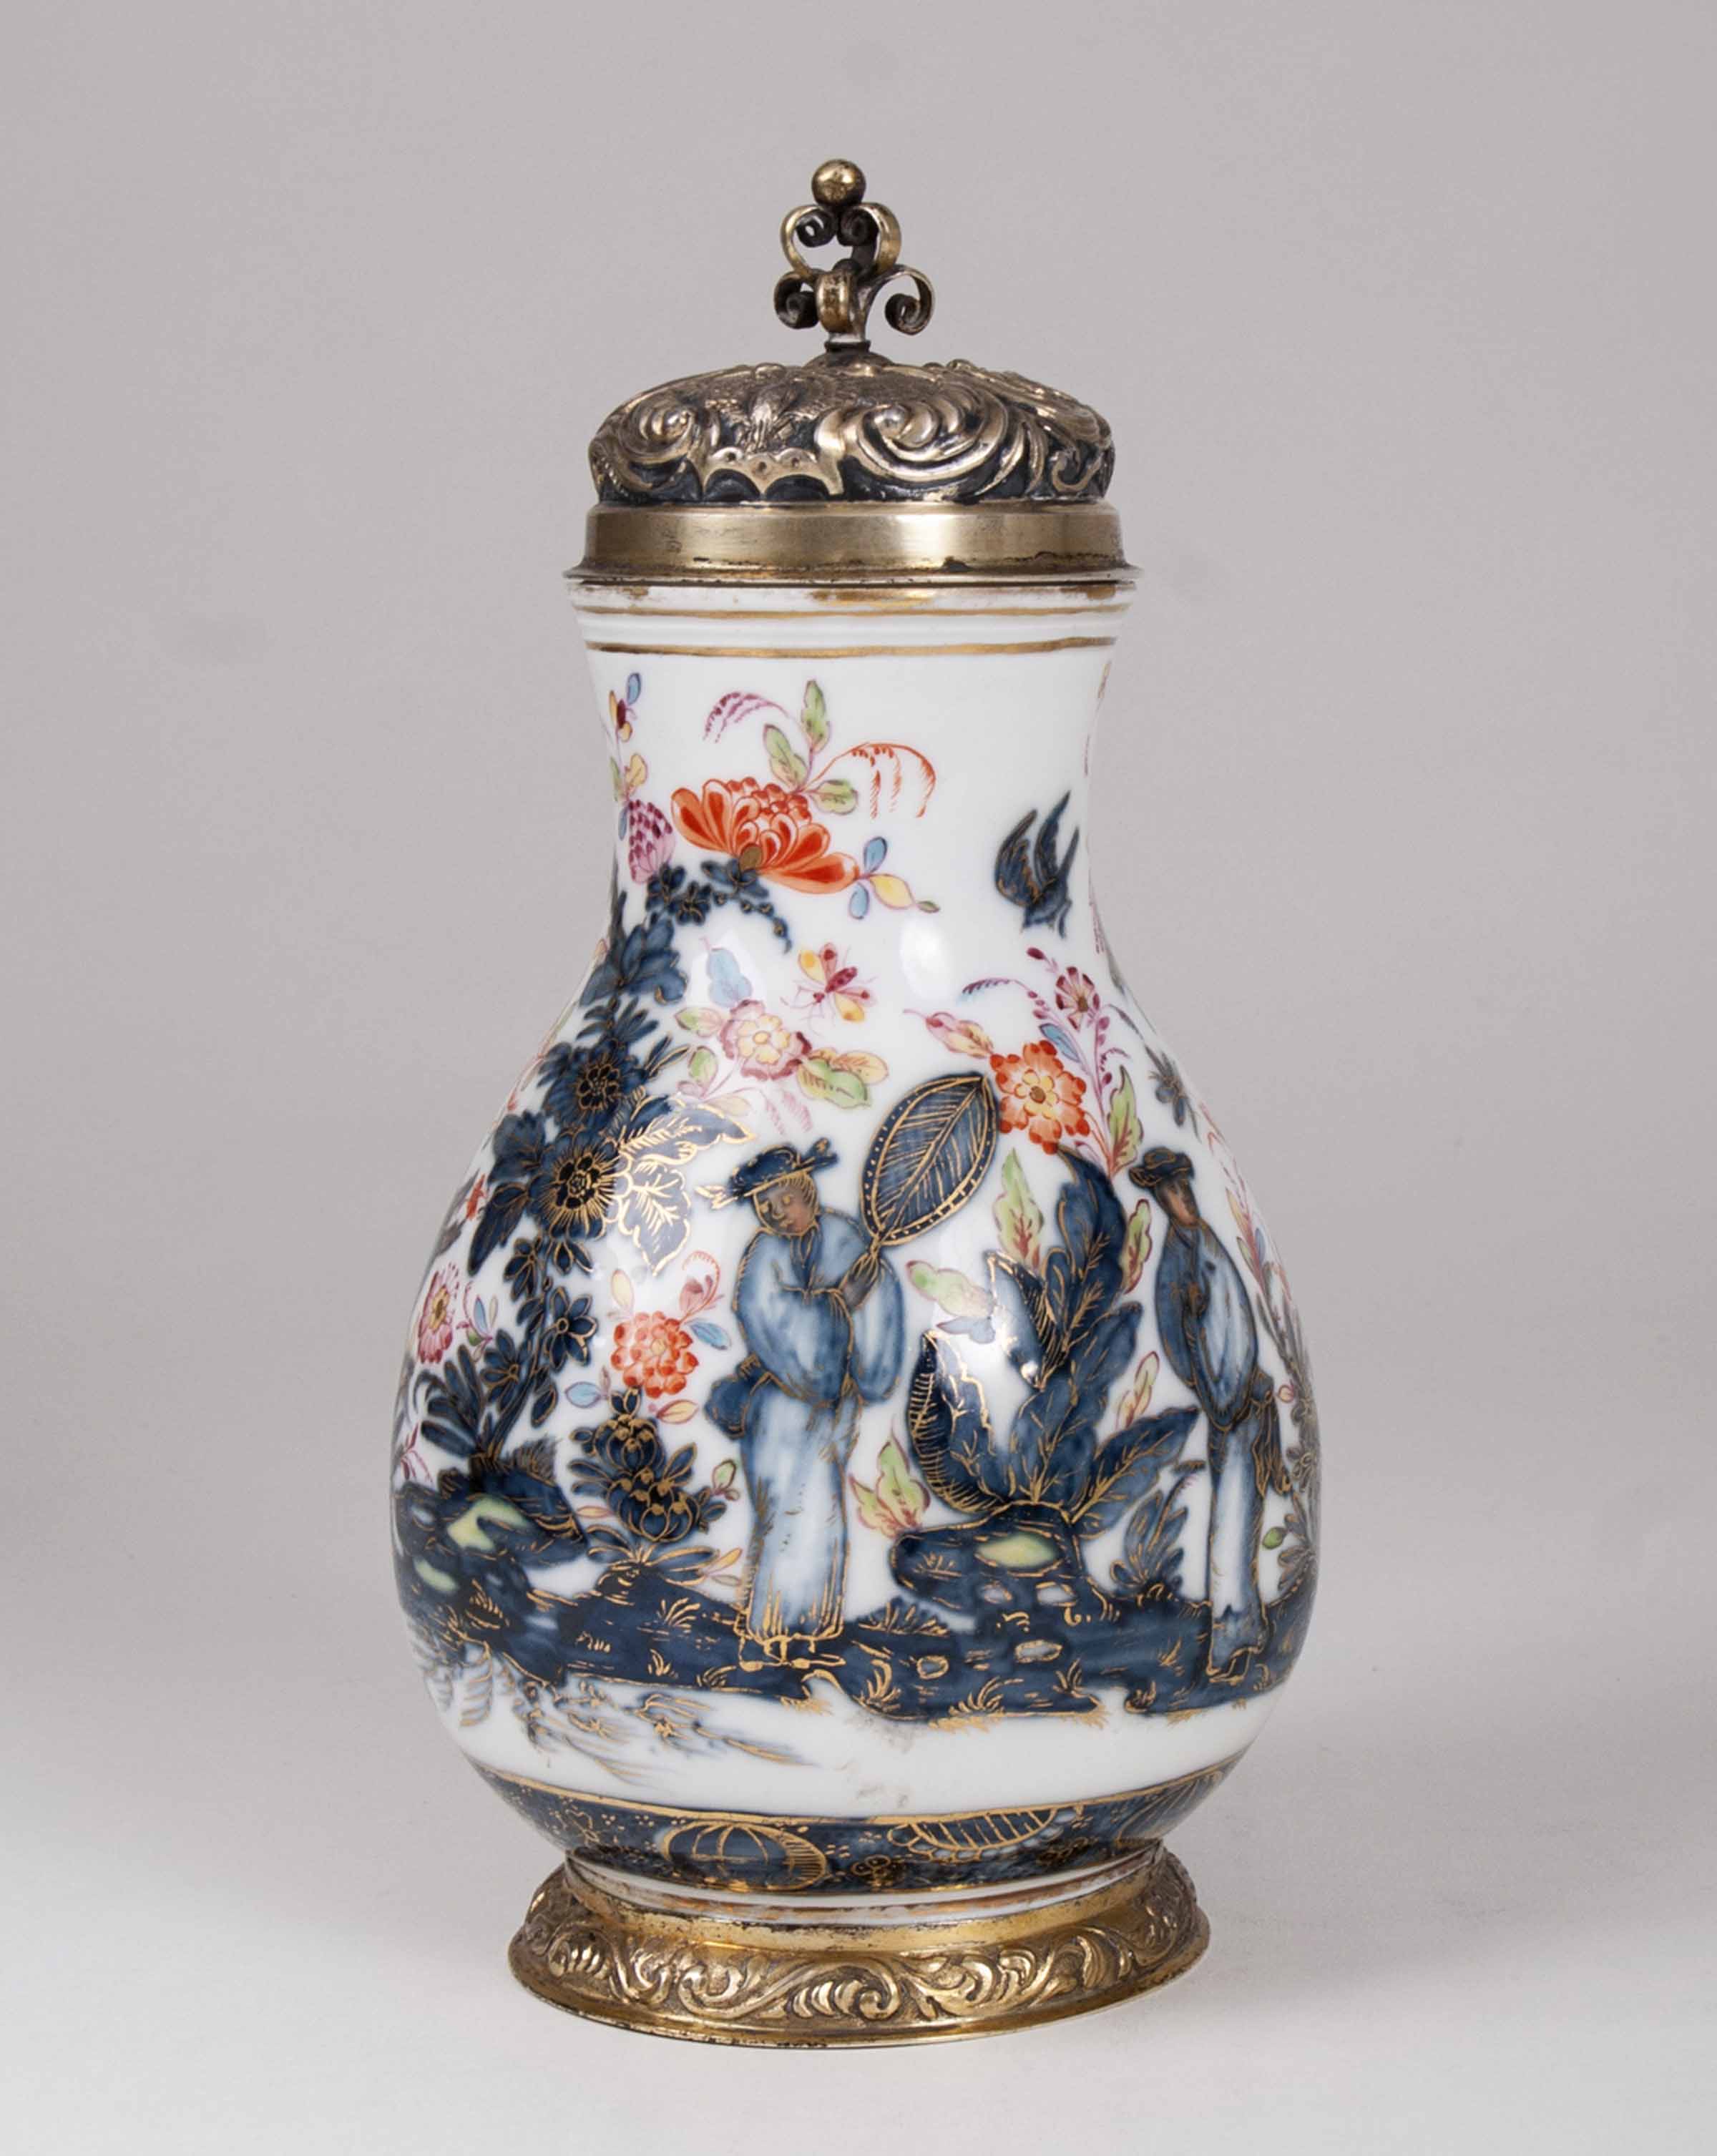 A rare early jug with chinoiserie - image 2